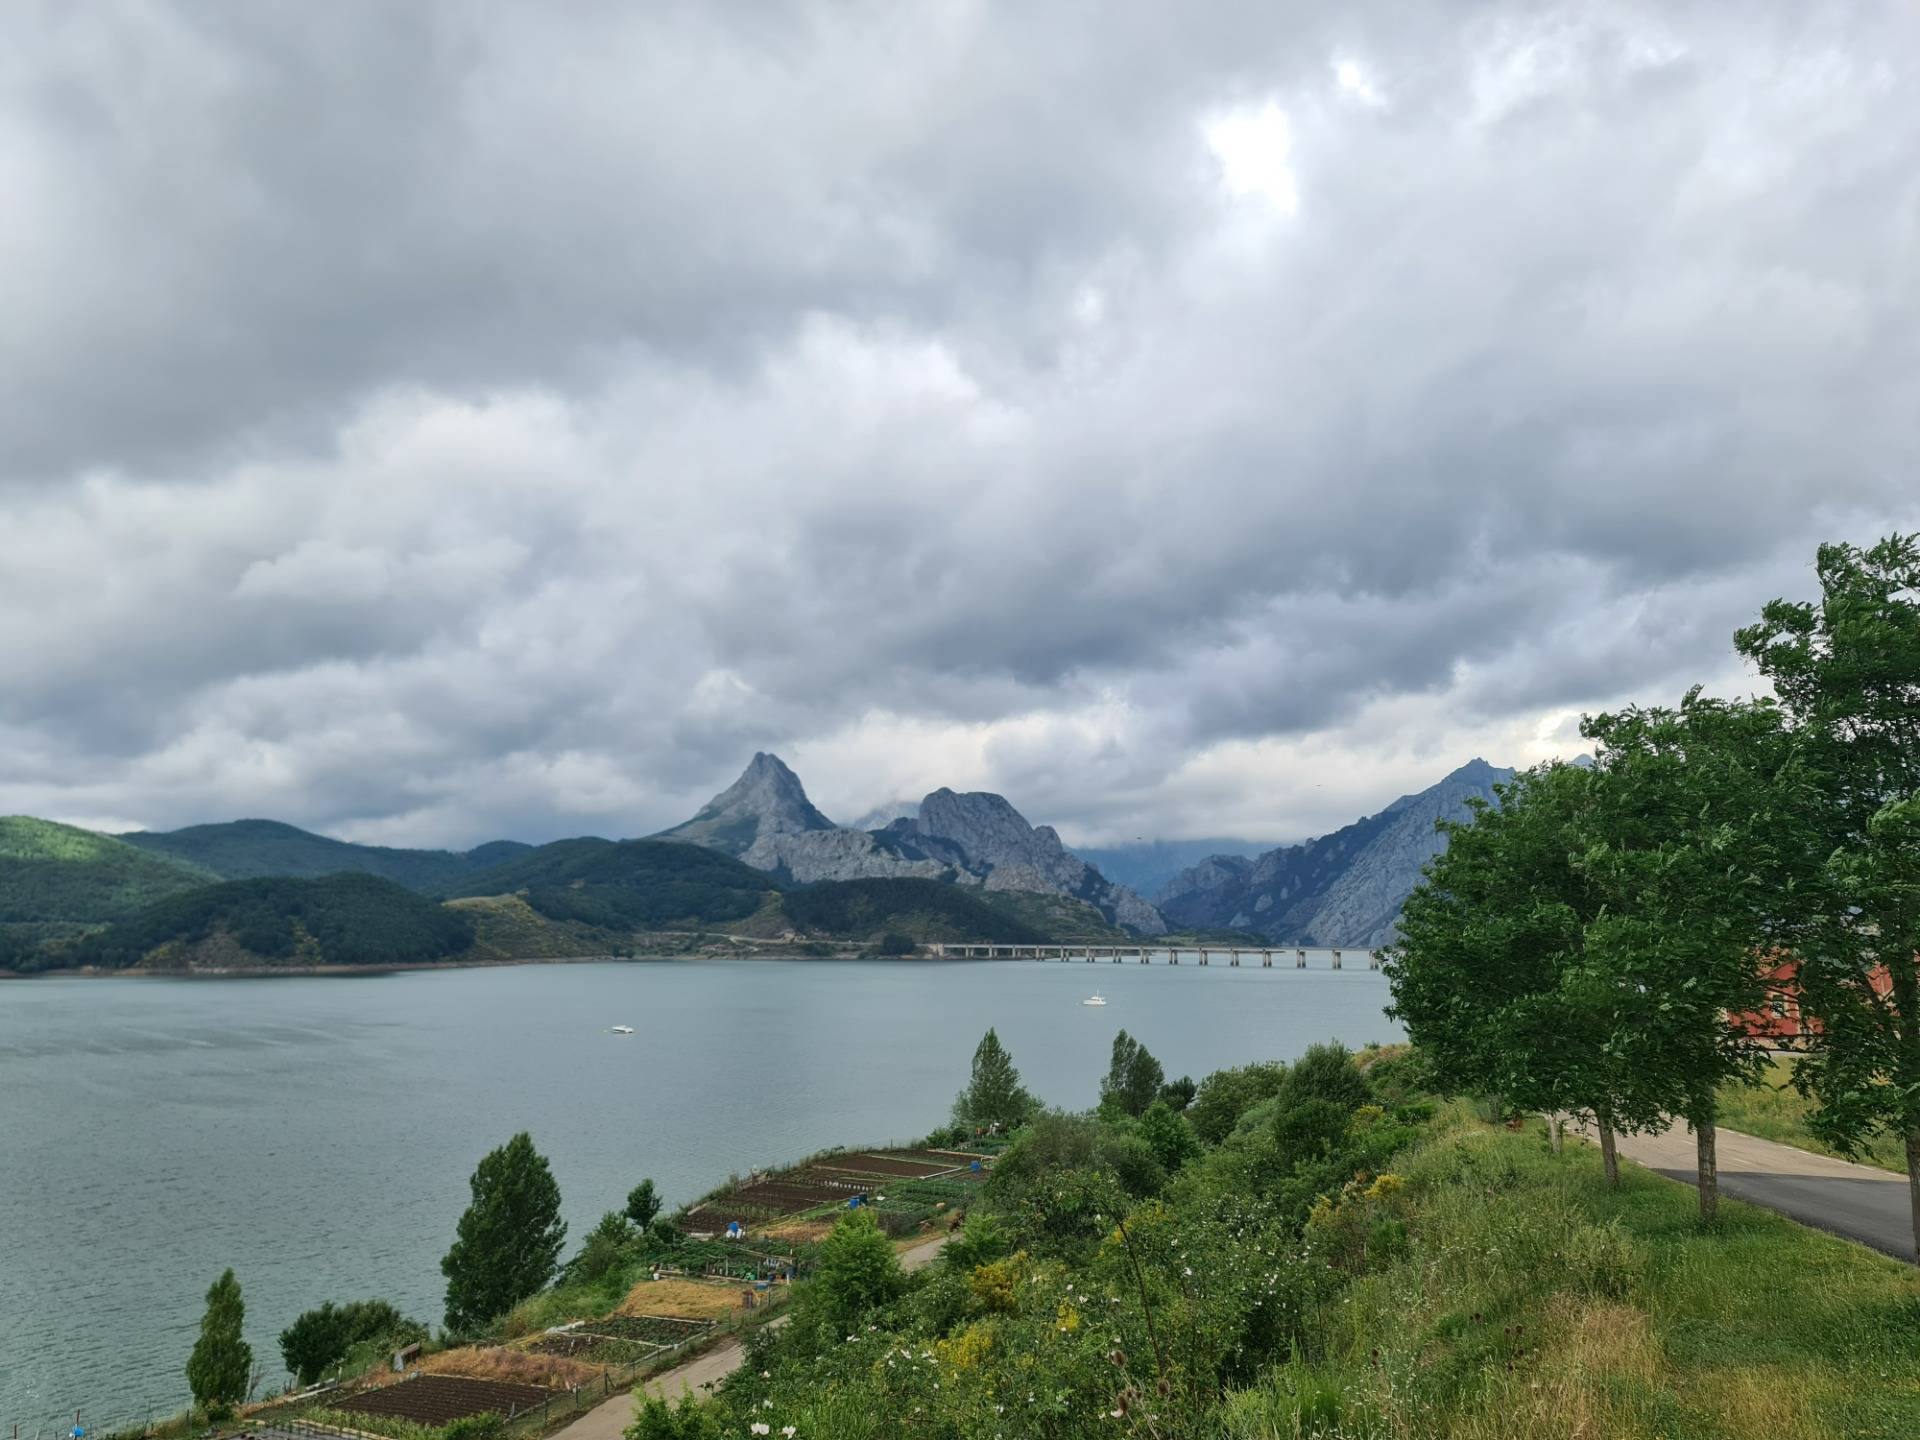 Small orchards on the banks of the Riaño reservoir and the Riaño bridge and the Gilbo peak in the background.